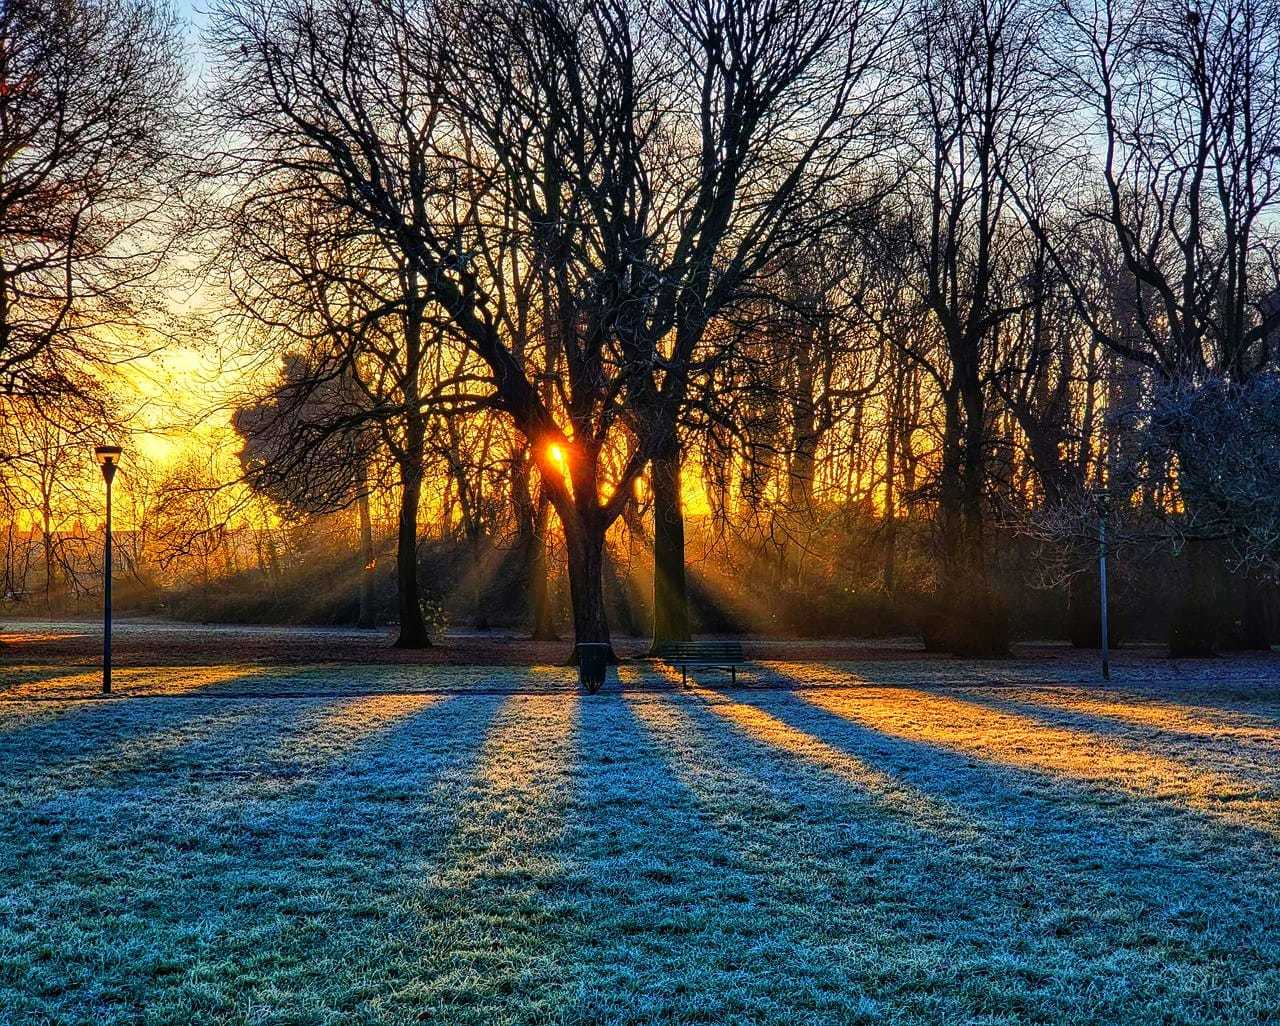 Winter morning in Orford Park by Tony Crawford